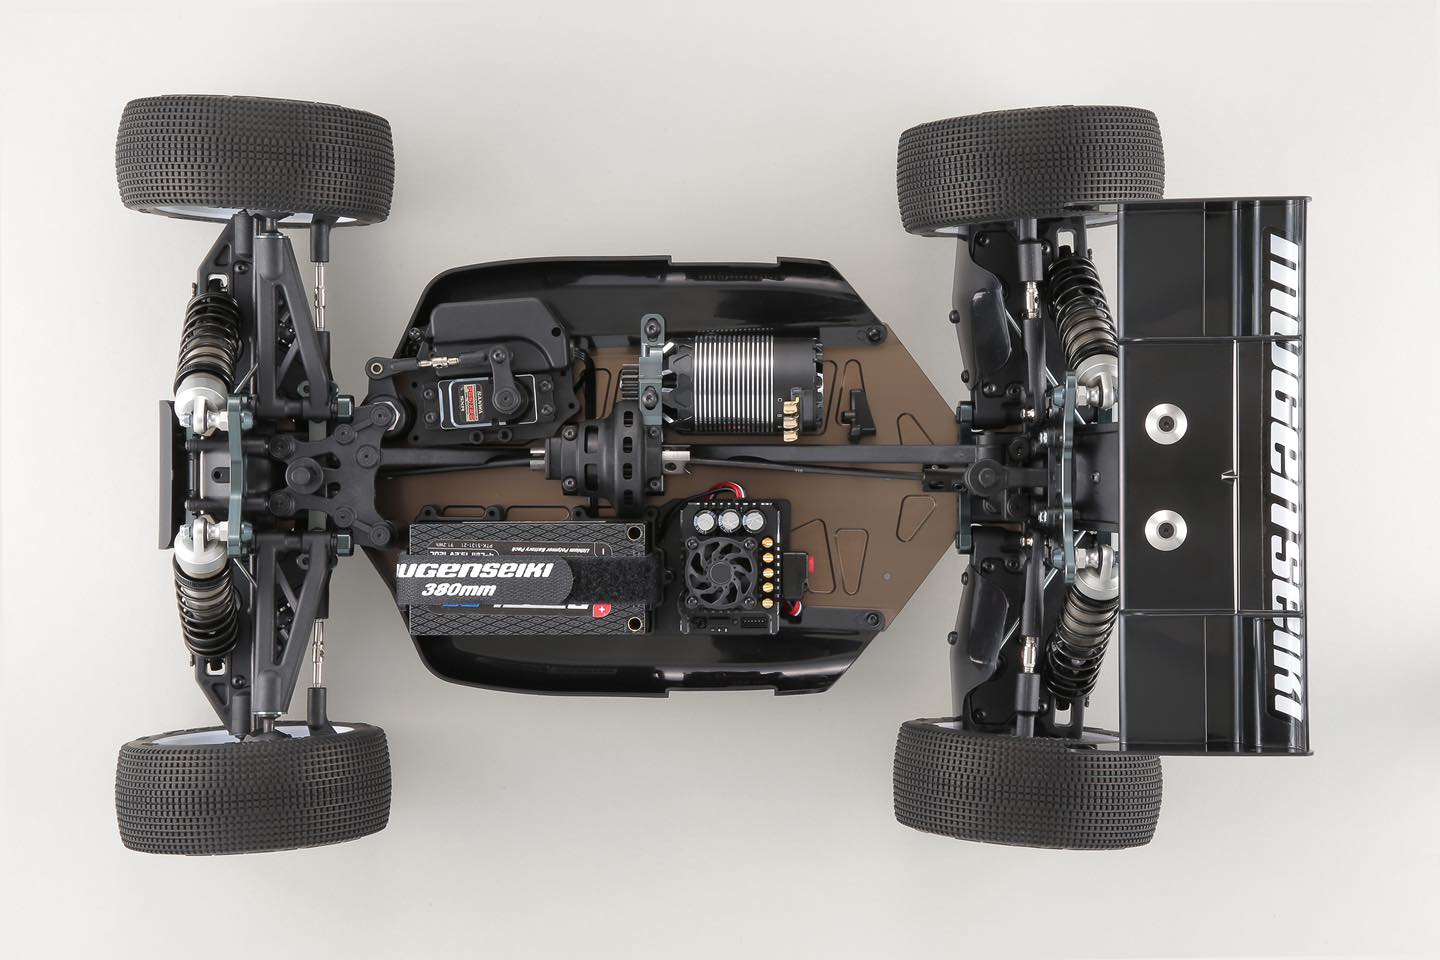 Mugen Seiki MBX8R Eco 1/8-scale Electric 4WD Racing Buggy